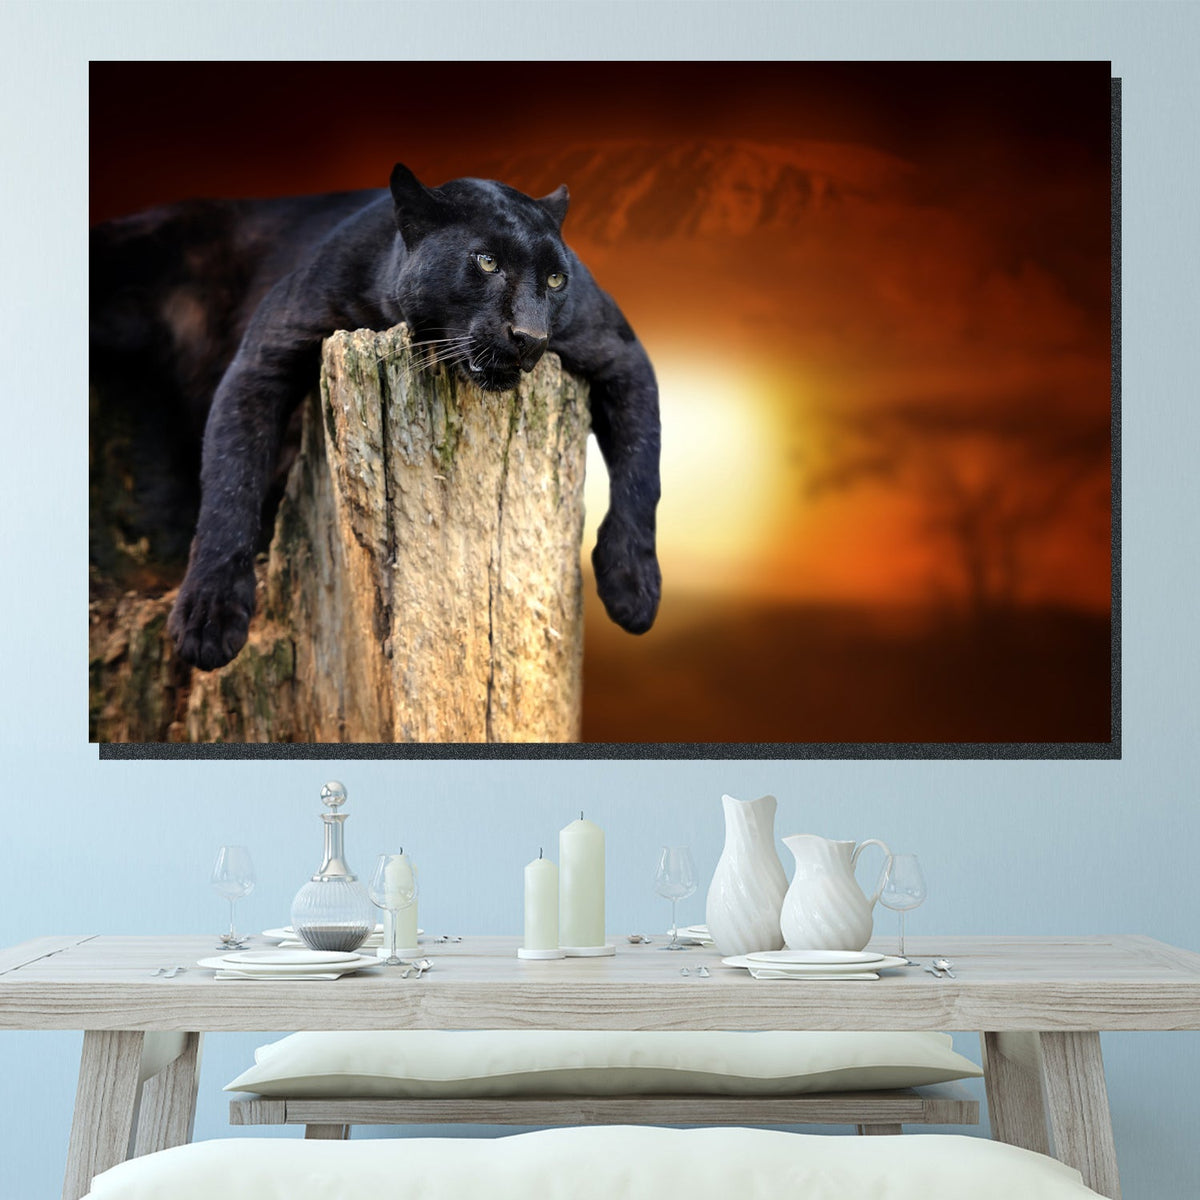 https://cdn.shopify.com/s/files/1/0387/9986/8044/products/LazyPantherCanvasArtprintStretched-3.jpg